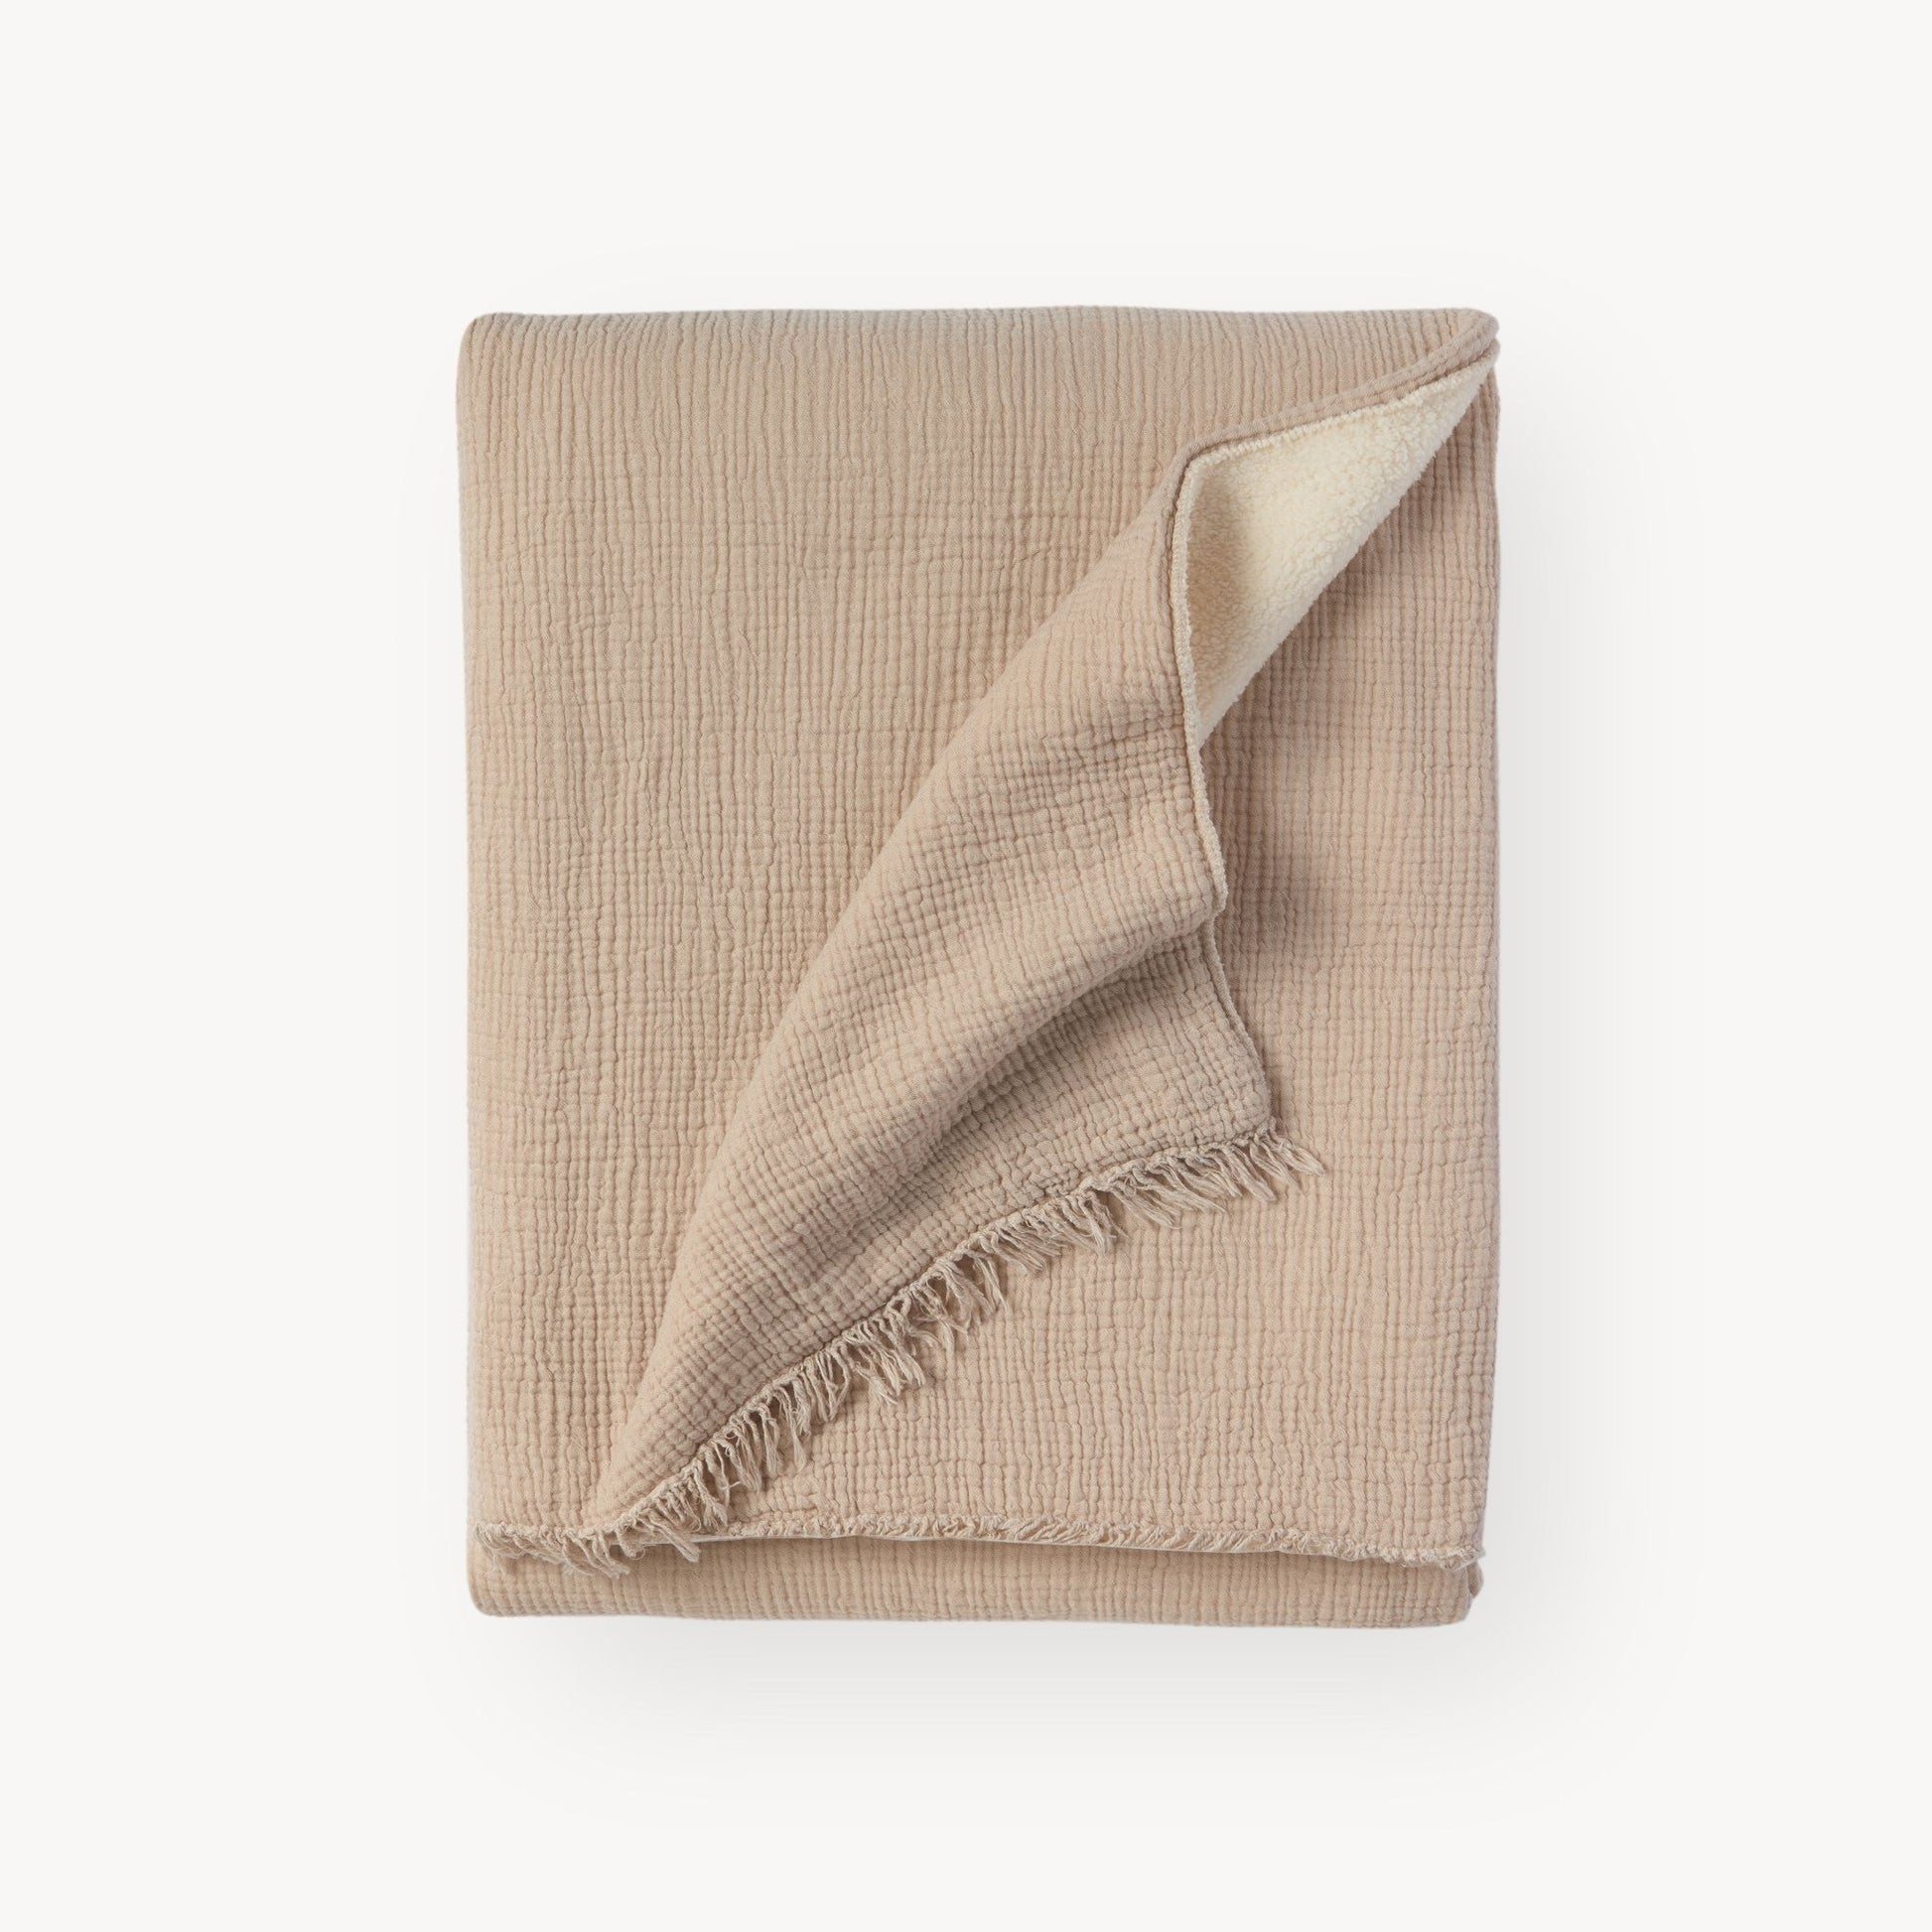 Beige crinkle muslin plus fleece blanket. Made with 100% Turkish cotton blanket with 100% high-quality polyester fleece